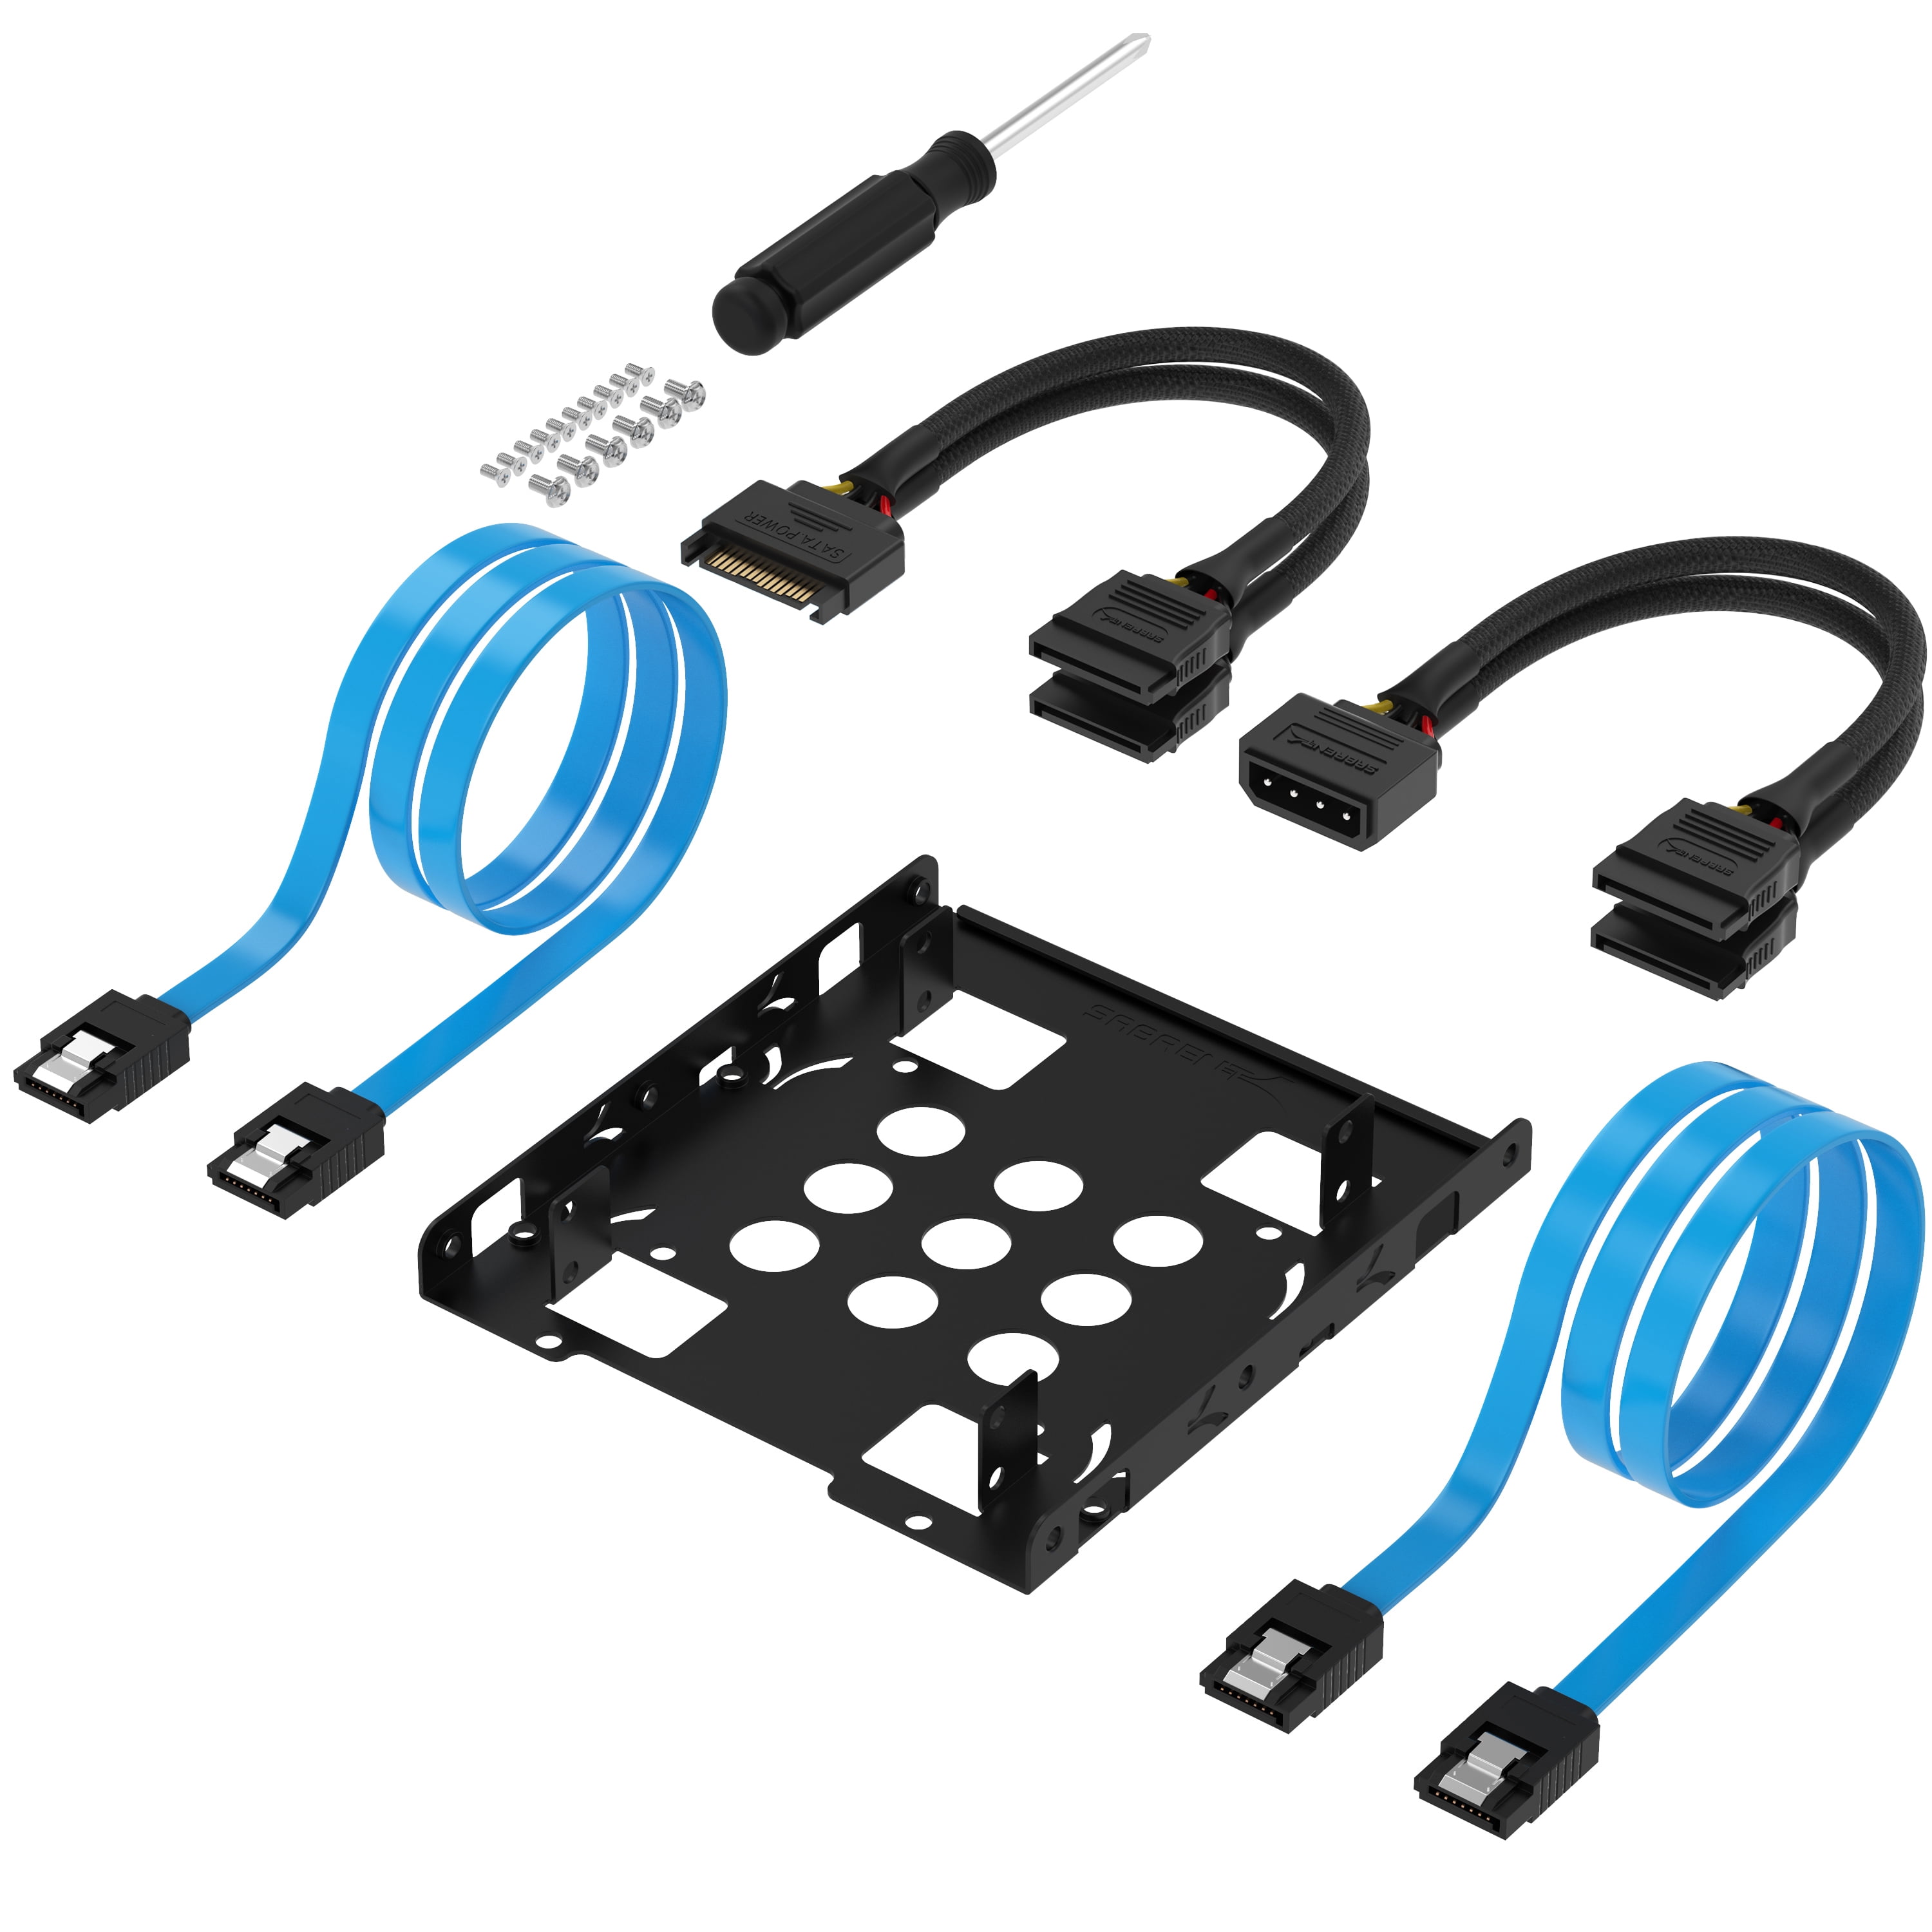 Sabrent 3.5-Inch to x2 / 2.5-Inch Internal Hard Drive Mounting Kit [SATA and Power Cables Included] (BK-HDCC) - Walmart.com